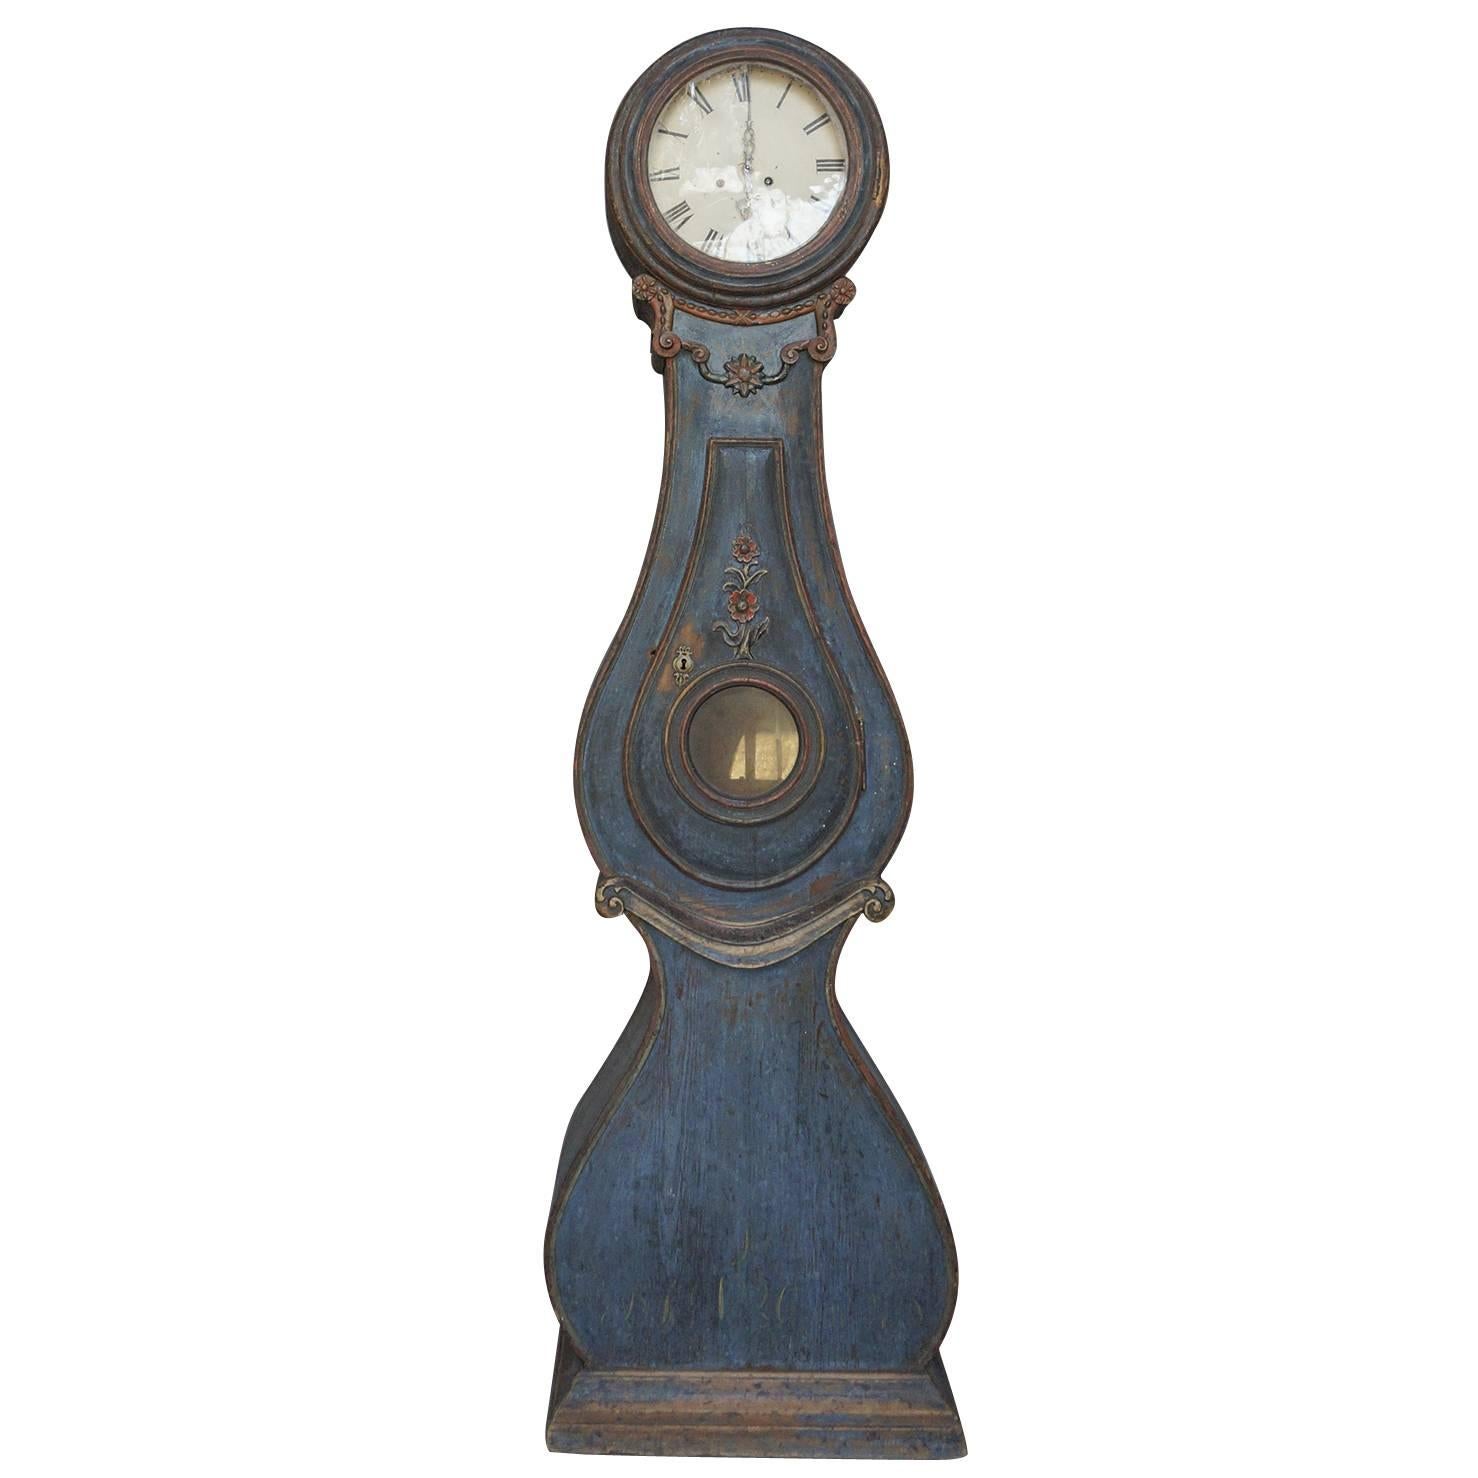 Swedish Tall Case Clock from Fryksdale in Original Decorative Paint